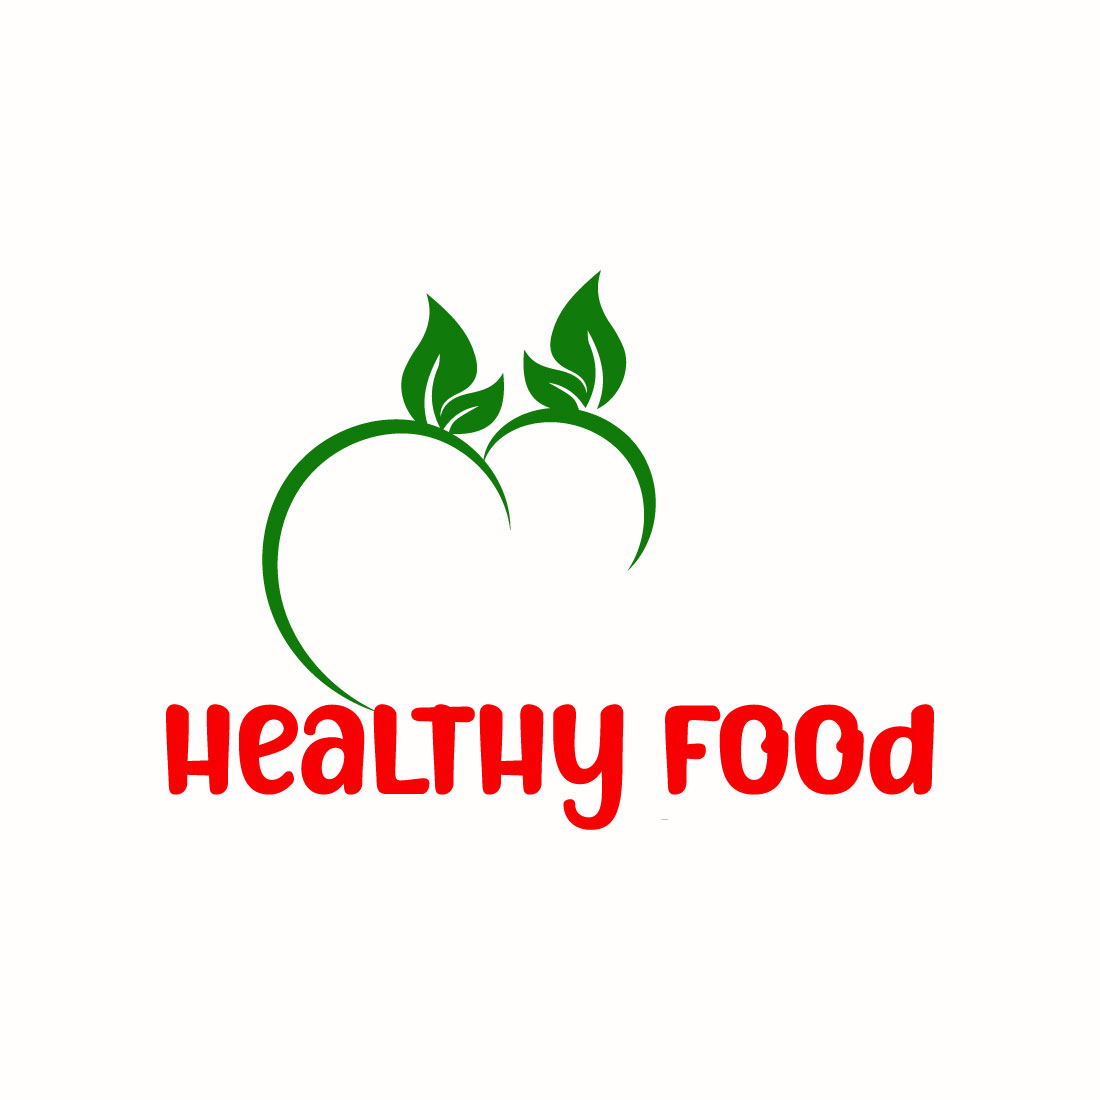 Free Better Health, Better Life logo preview image.